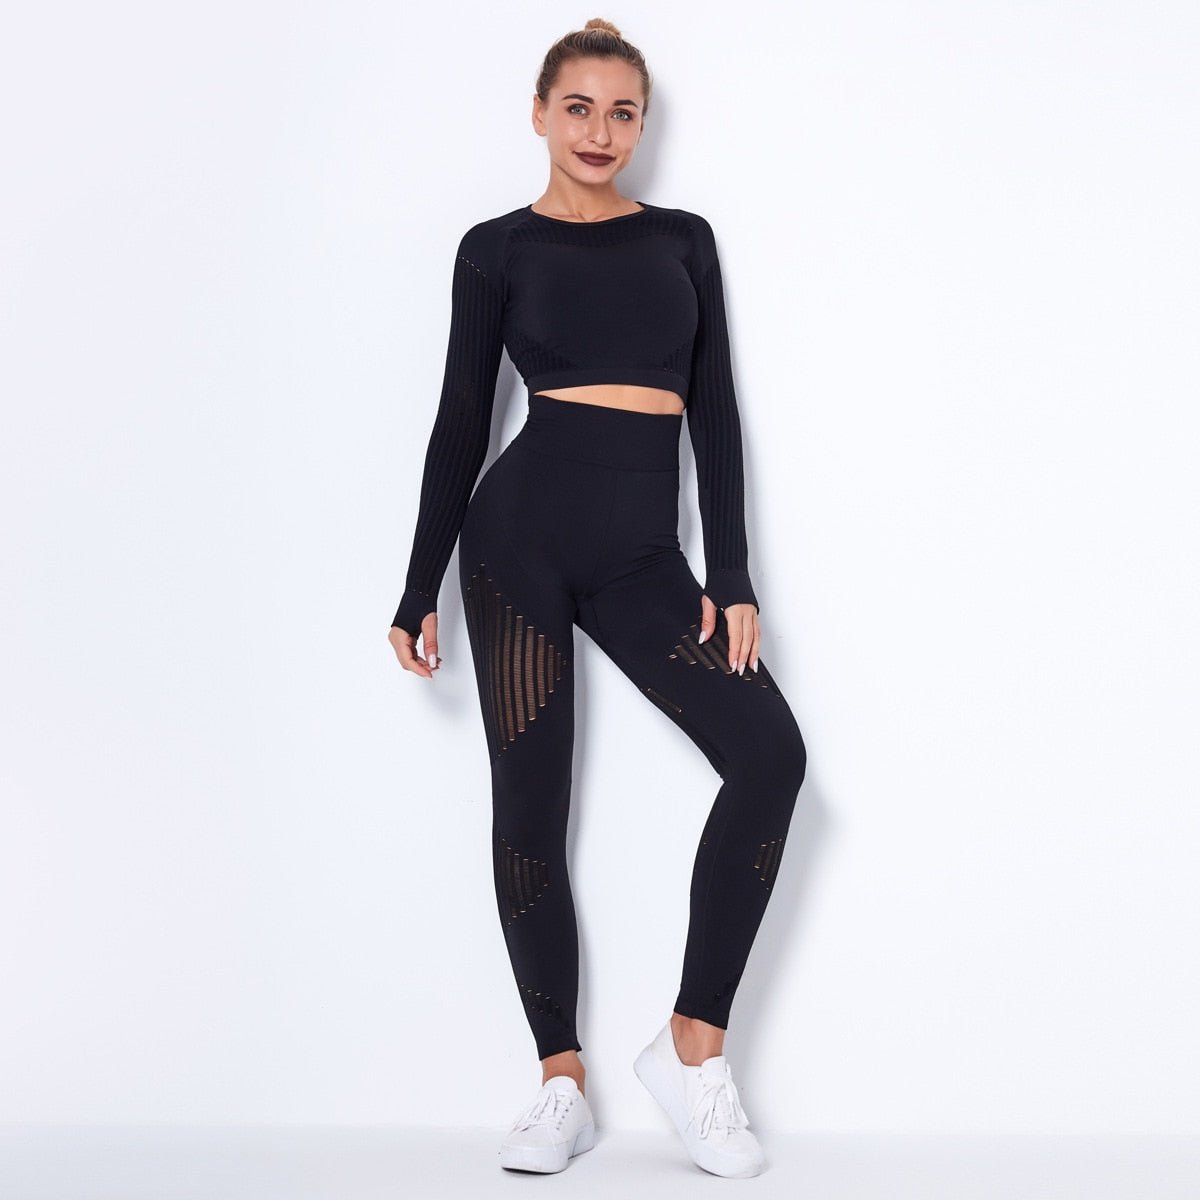 Hollow Out Seamless Yoga Set Sport Outfits Women Black Two 2 Piece